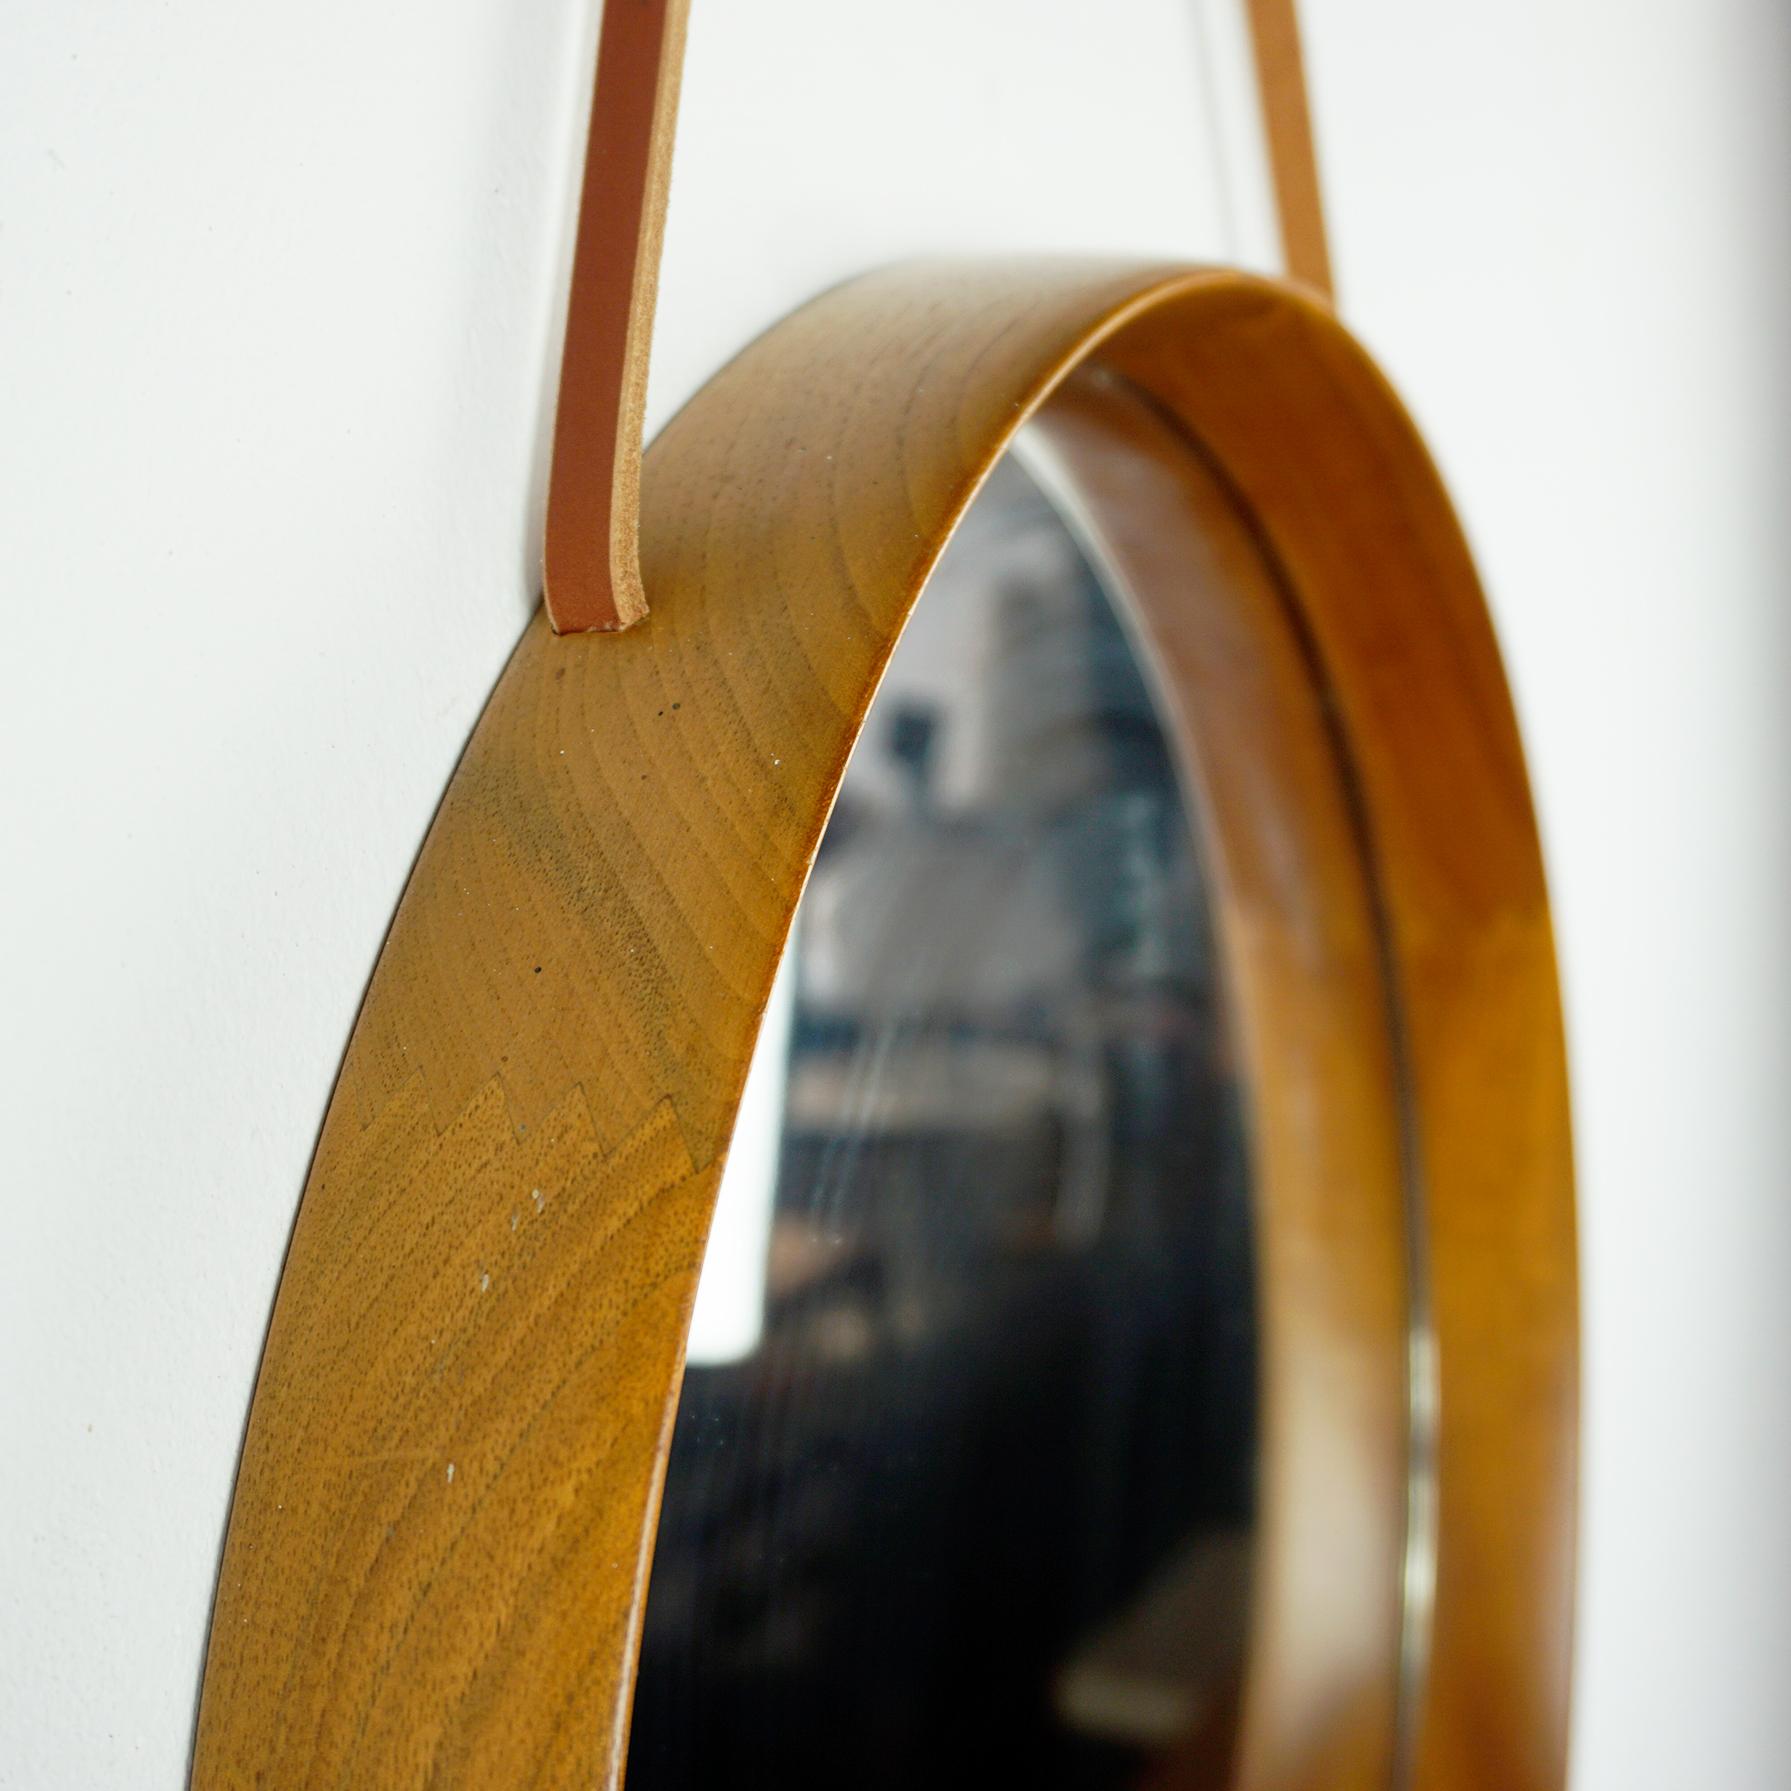   

This amazing Scandinavian Modern circular  teak wall mirror with leather hanging strap has been designed by Uno and Osten Kristiansson and manufactured by Luxus Vittsjö Sweden in the 1960s. 
 The frame circulates the glass and is made out of